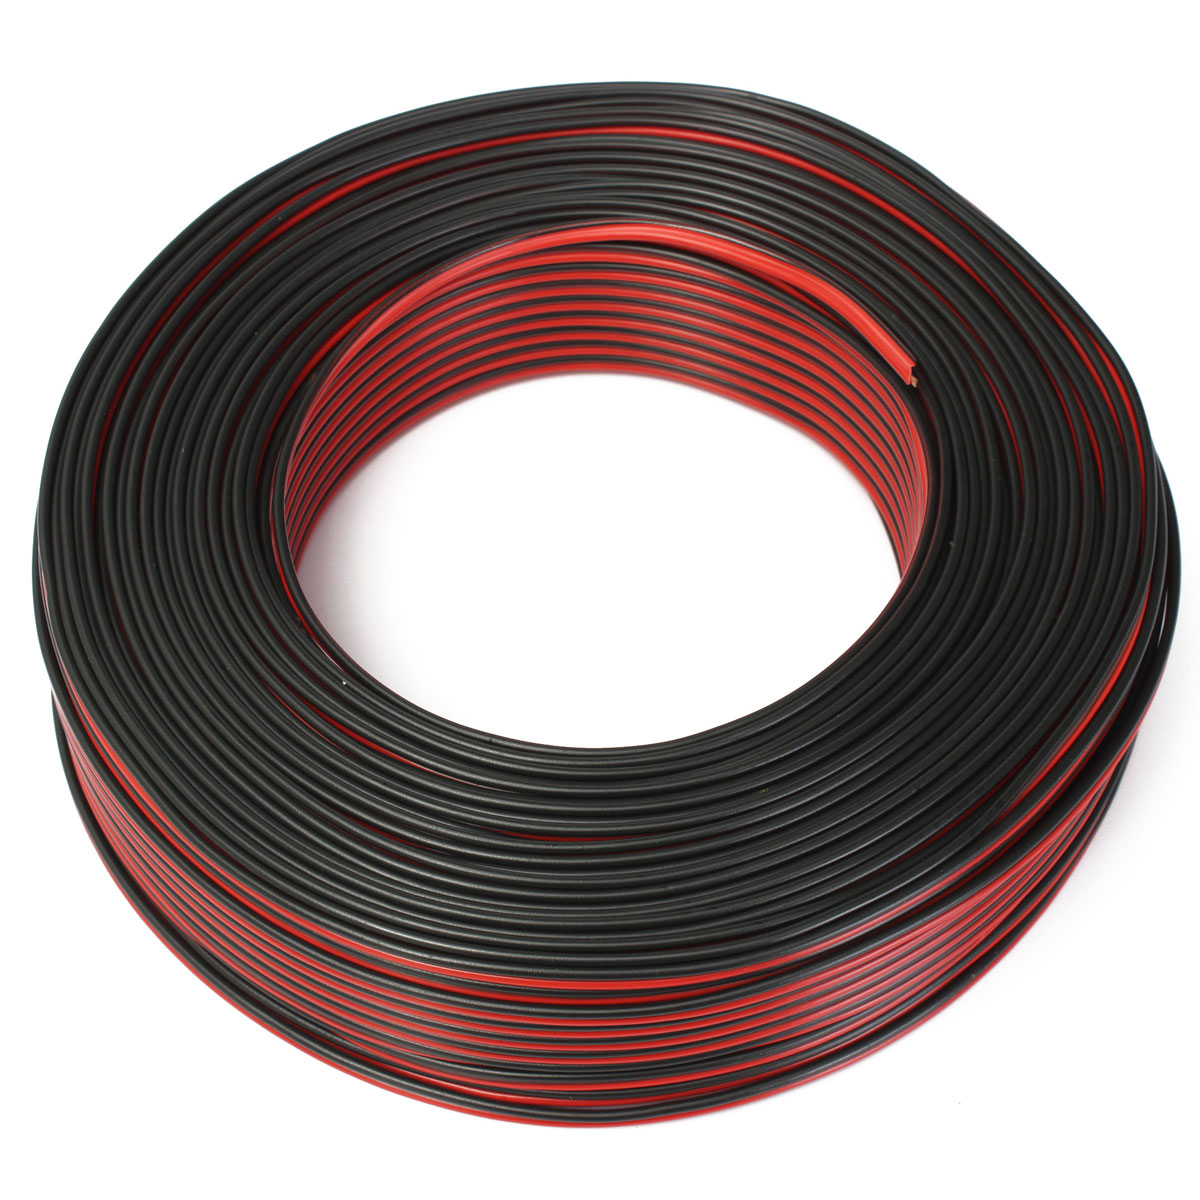 Find 100m 2 x 0 50mm Audio Cable Loudspeaker Speaker Wire Black/Red HiFi/Car Motorcycle for Sale on Gipsybee.com with cryptocurrencies